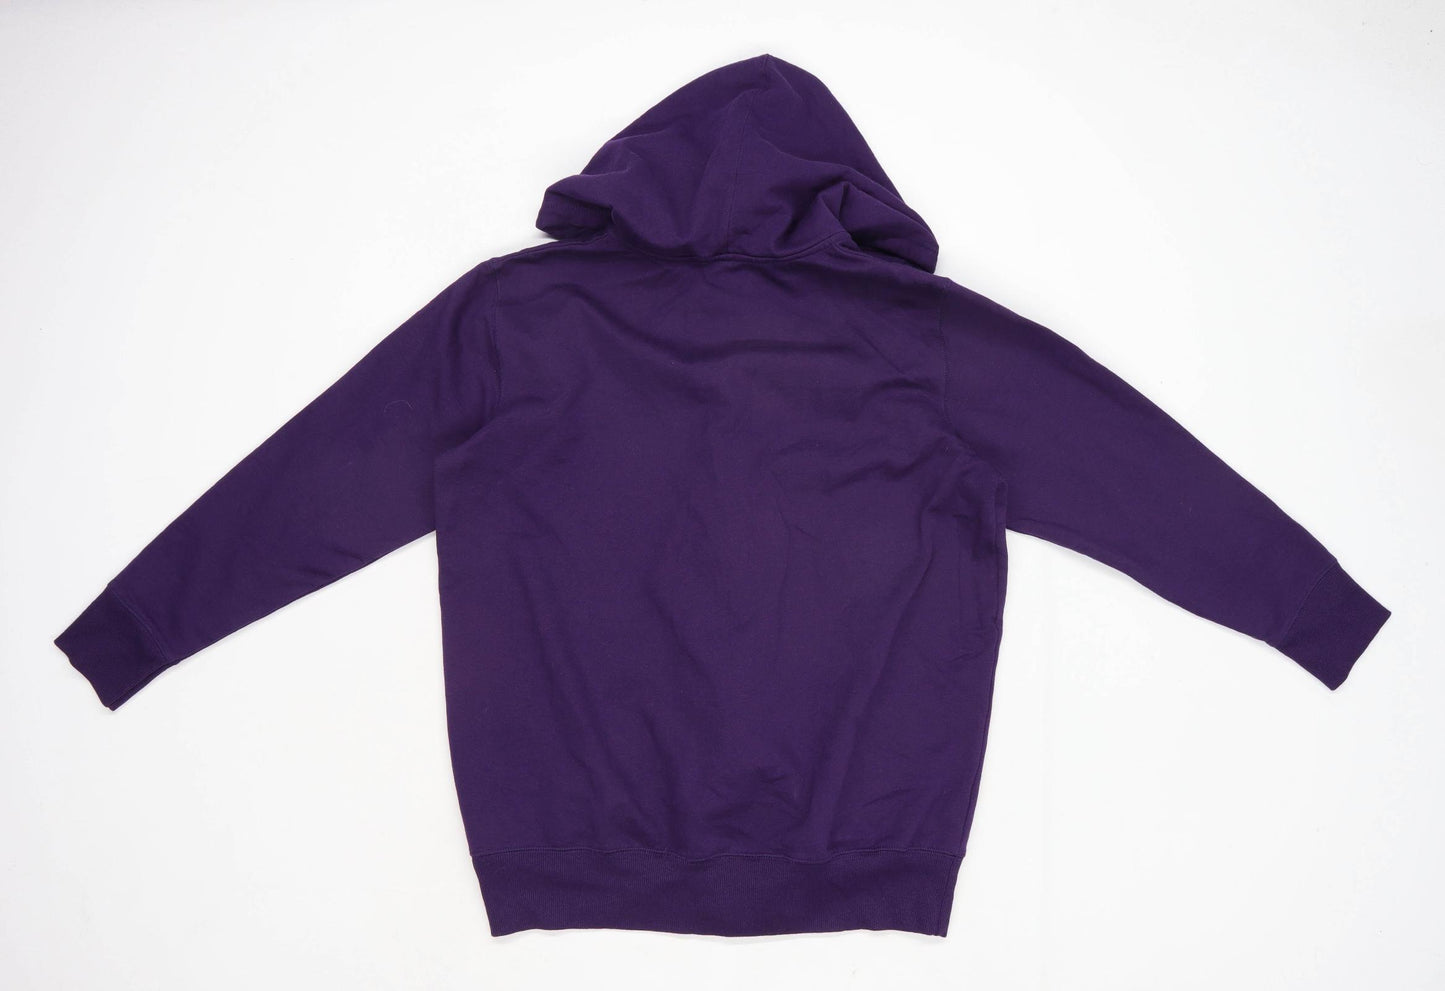 Yours Womens Size 16 Cotton Blend Purple Hoodie (Regular)